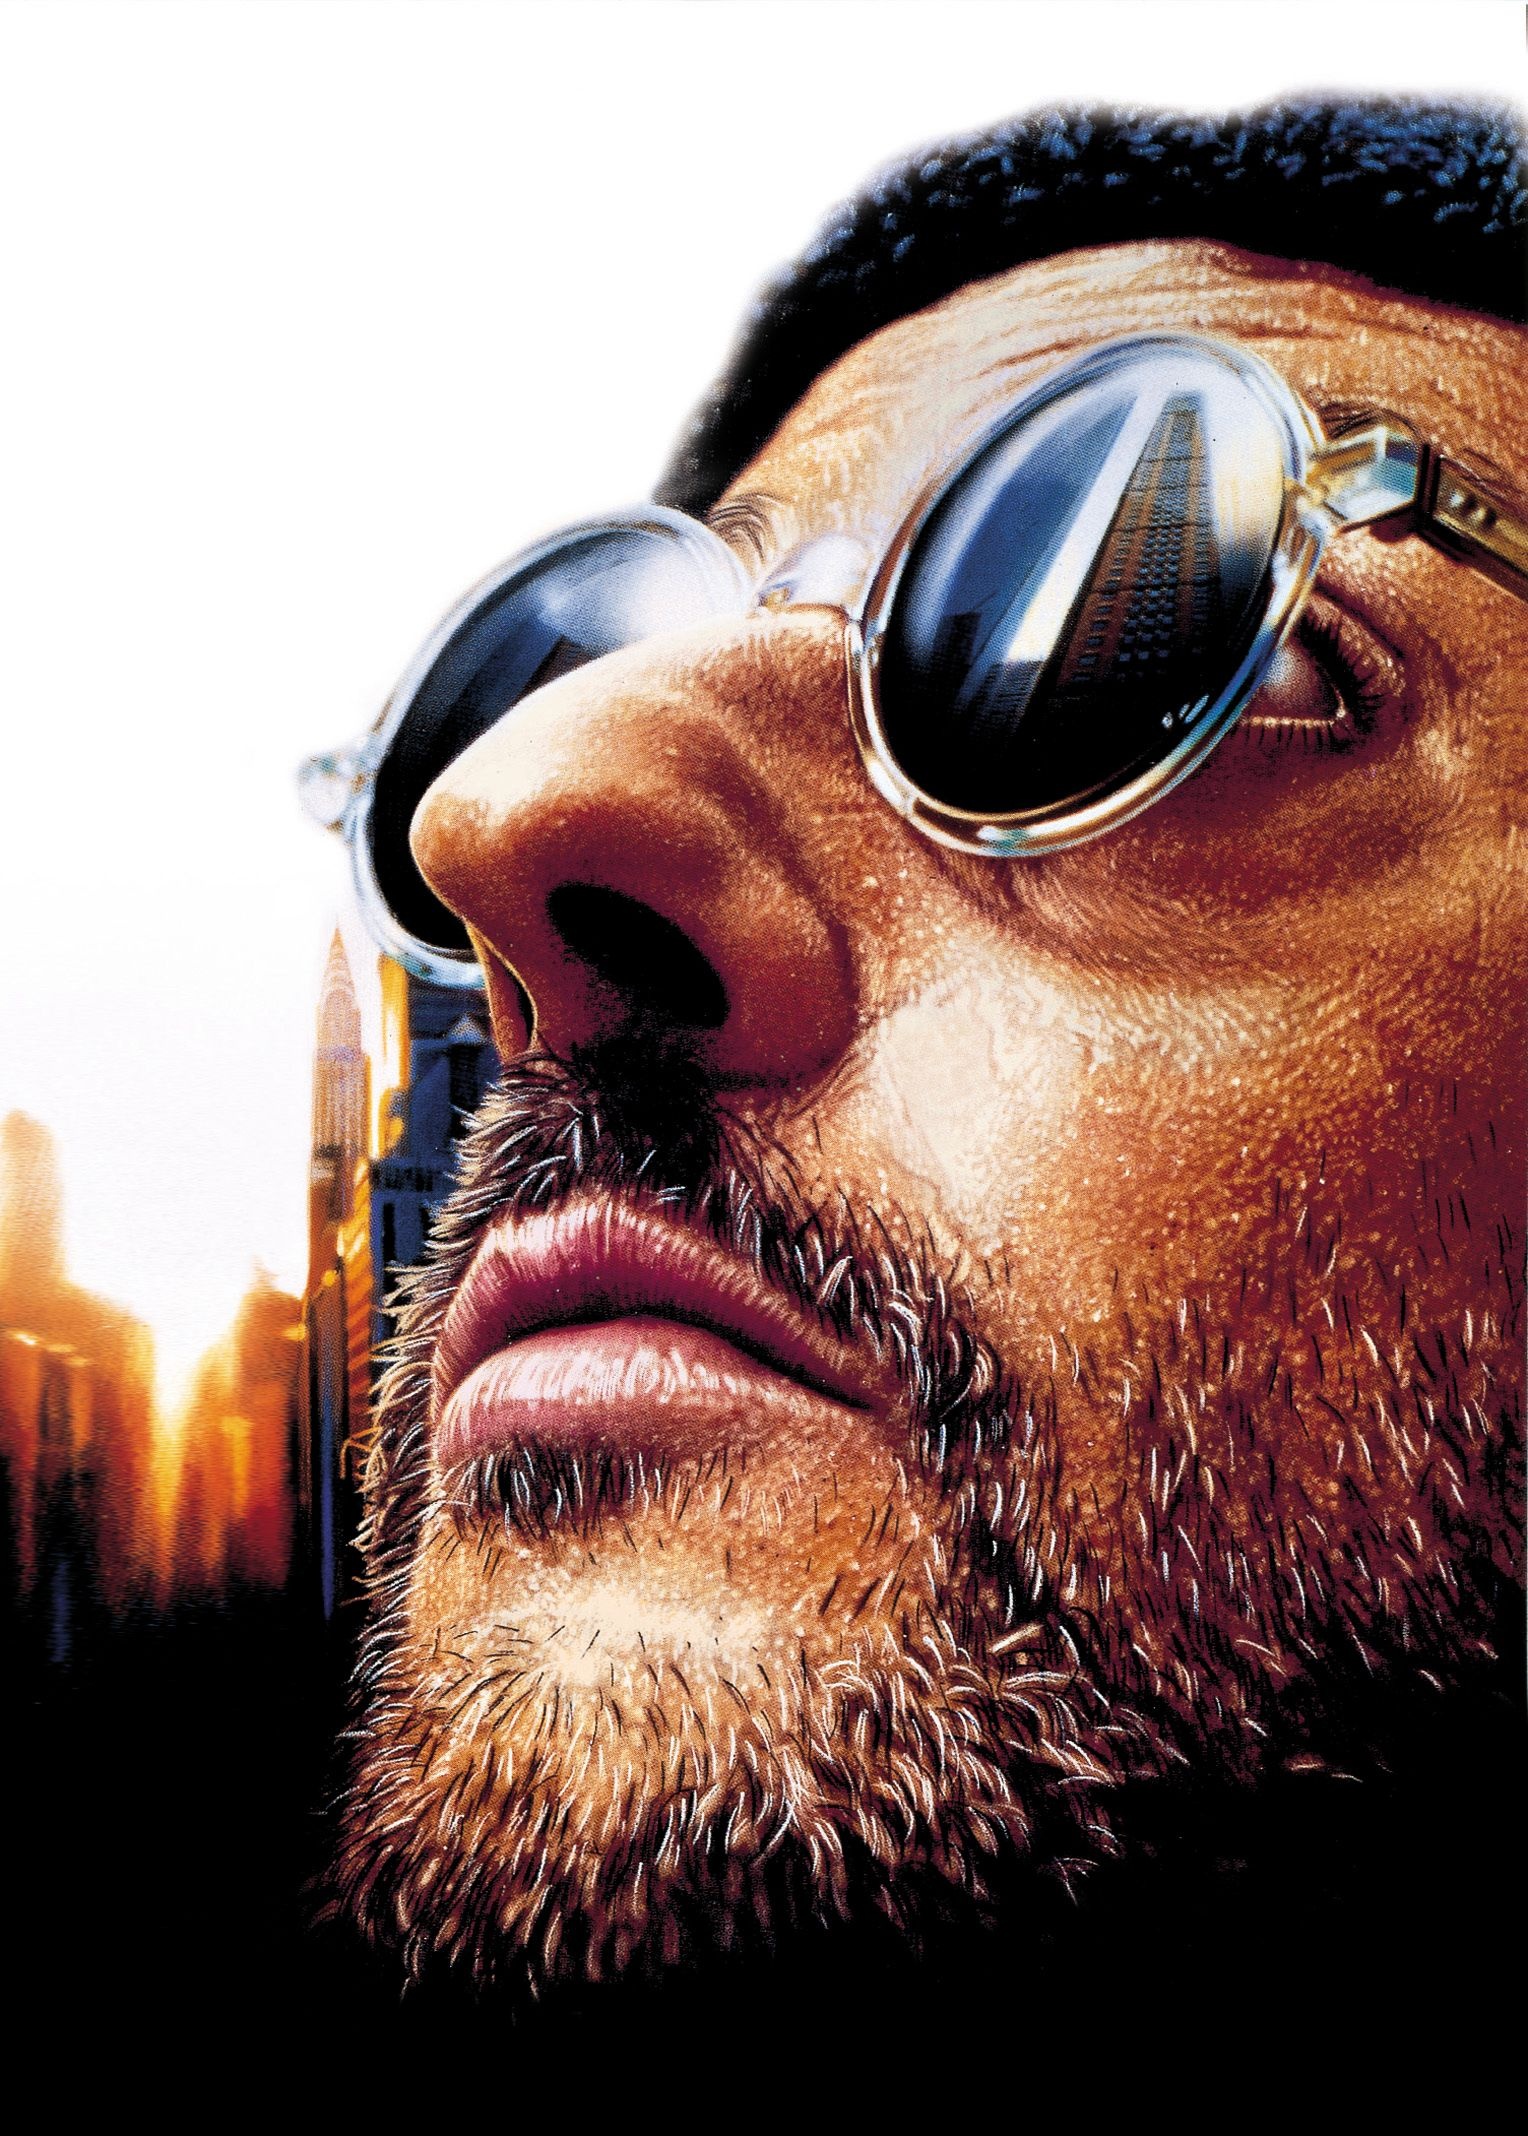 Leon: The film grossed over $45 million worldwide on a $16 million budget. 1530x2140 HD Wallpaper.